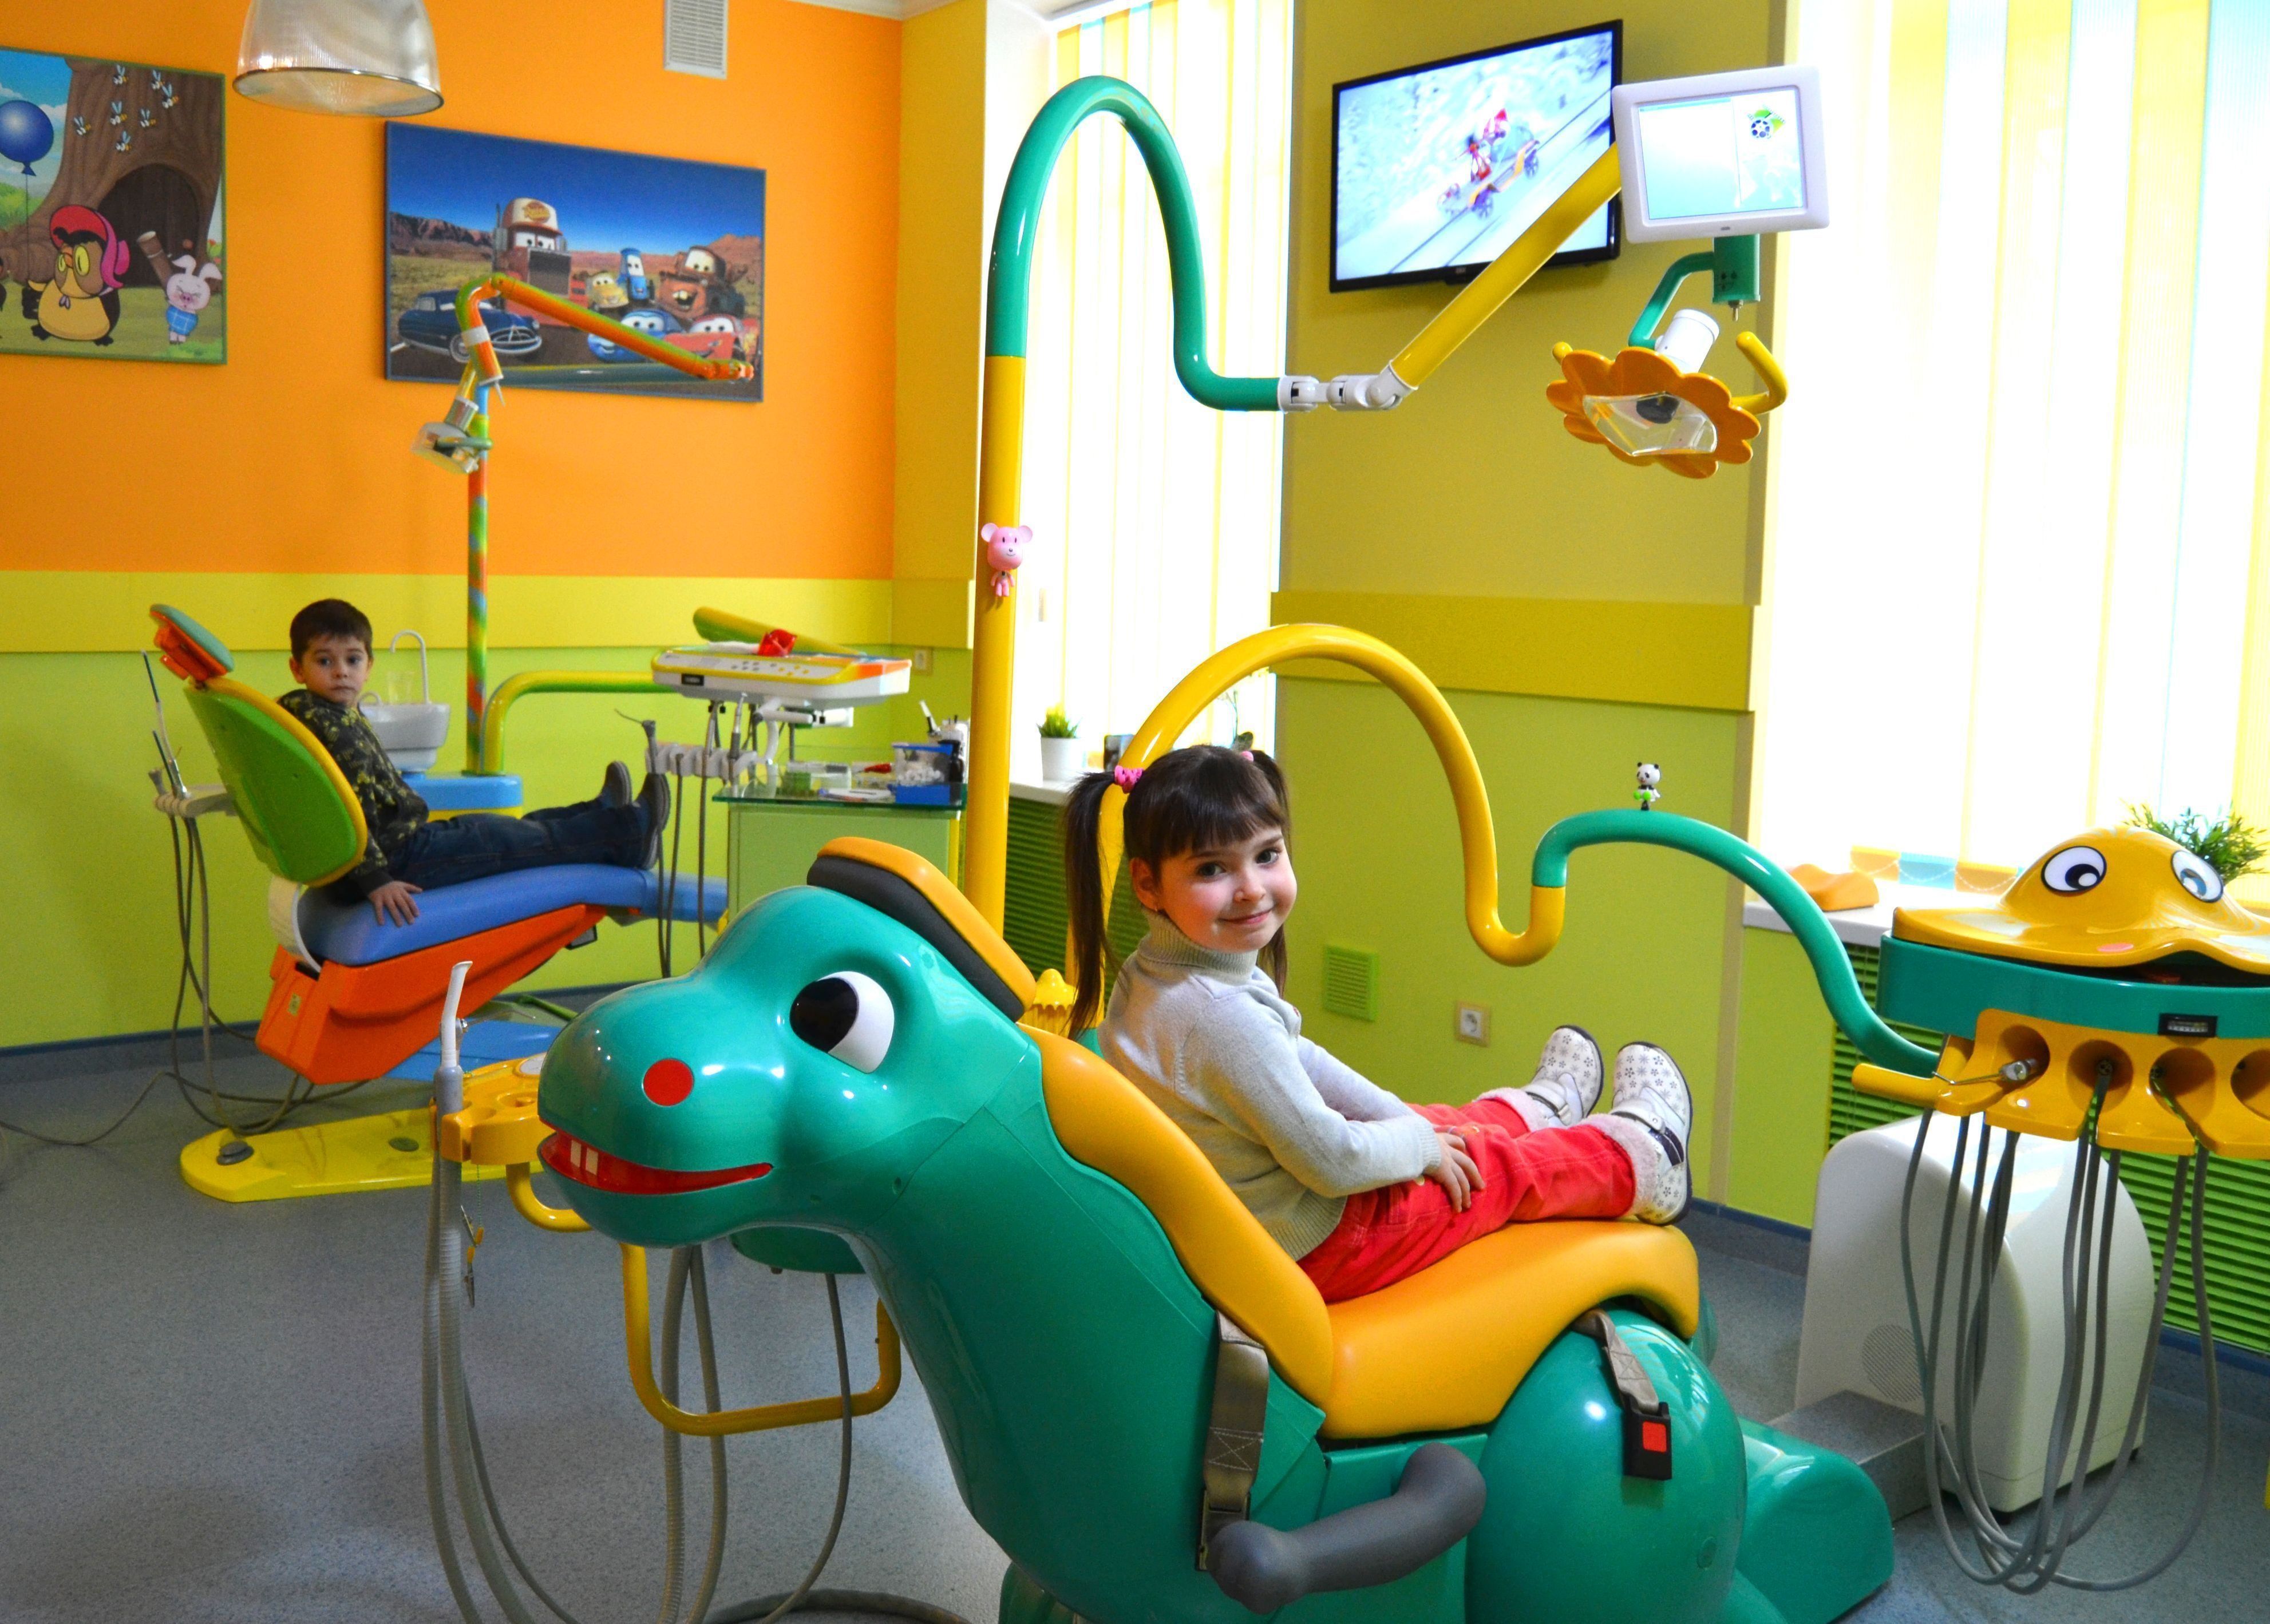 The best paid dental clinics for children in Novosibirsk in 2022